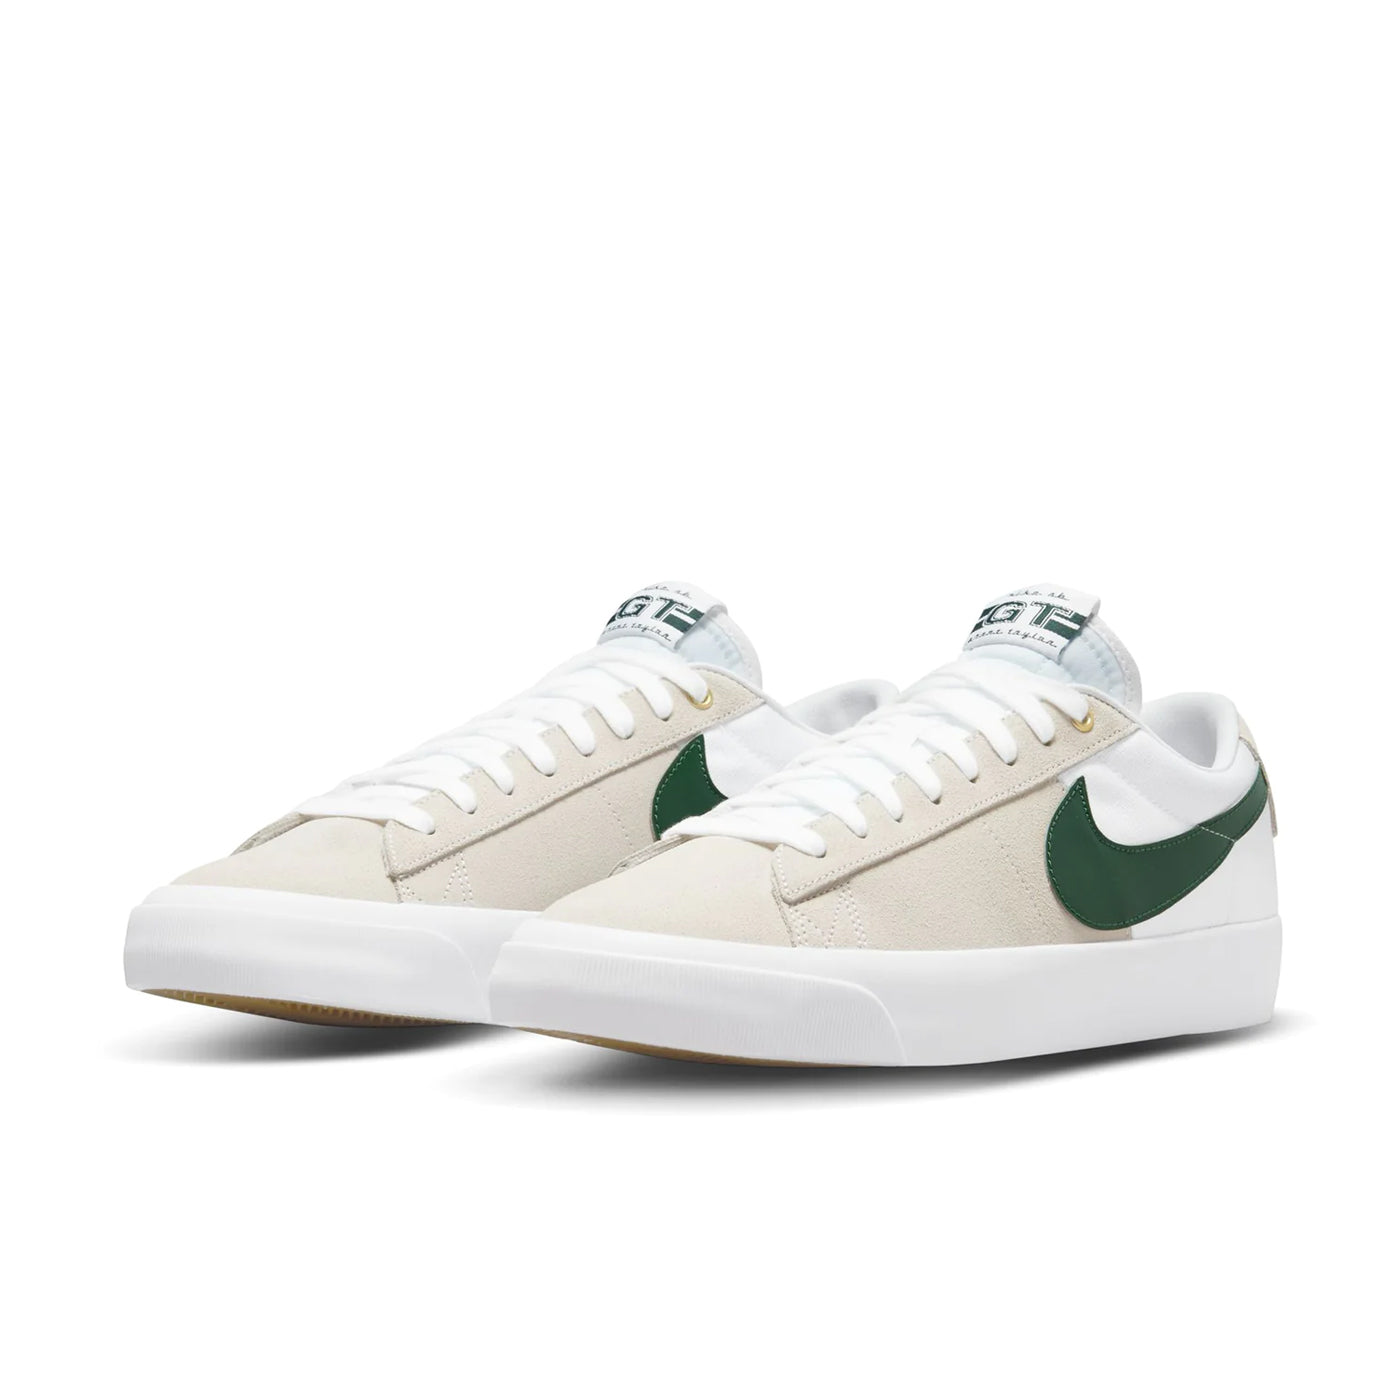 Low top Nike SB Blazer Low GT skate shoes, in white colourway, with green Nike swoosh on sides.